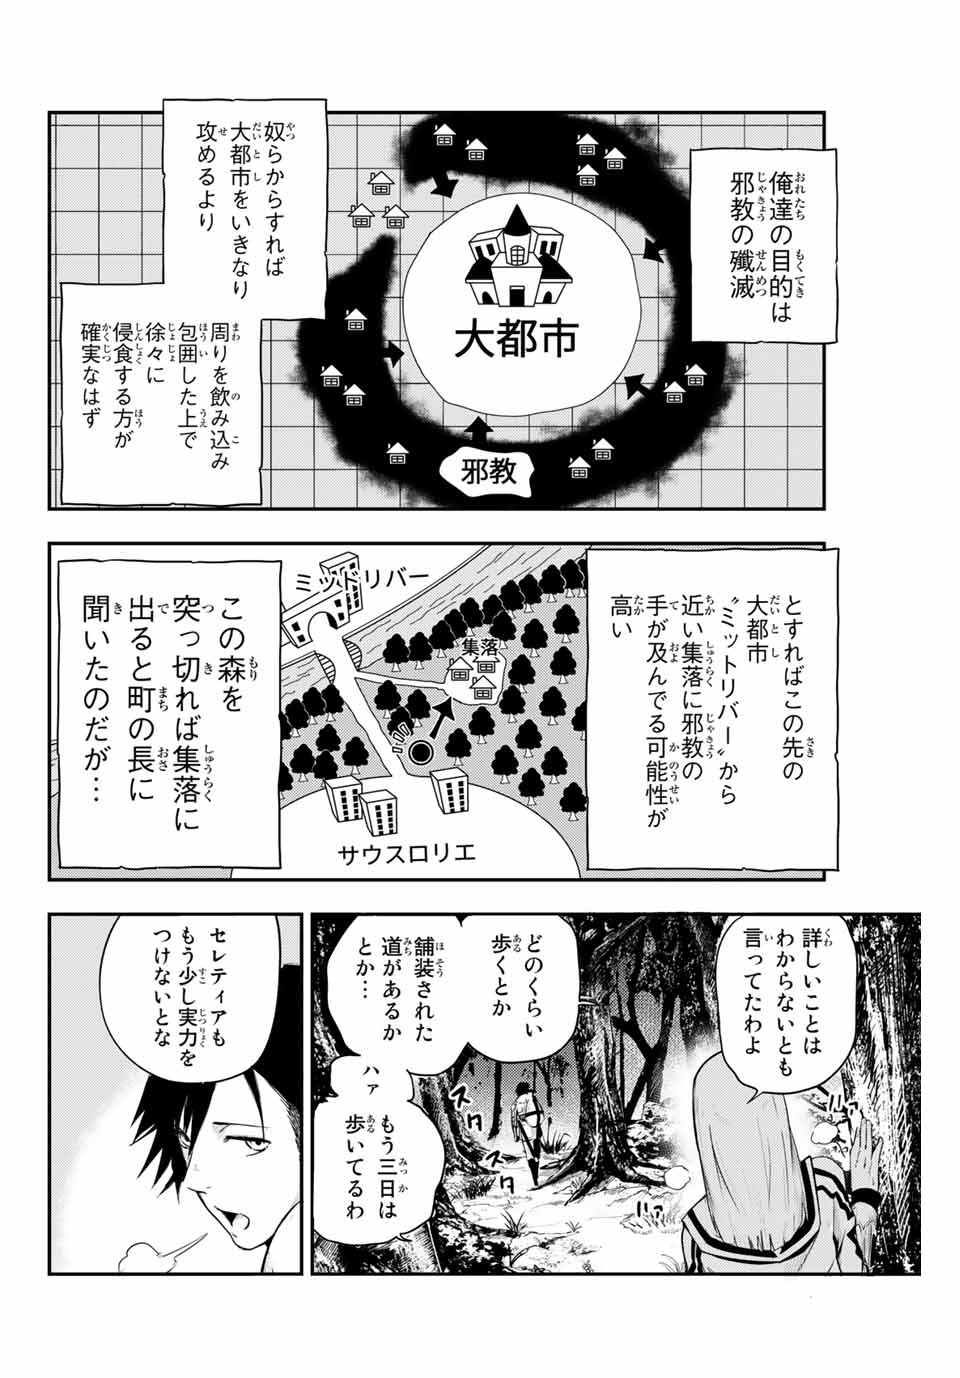 the strongest former prince-; 奴隷転生 ～その奴隷、最強の元王子につき～ 第6話 - Page 10